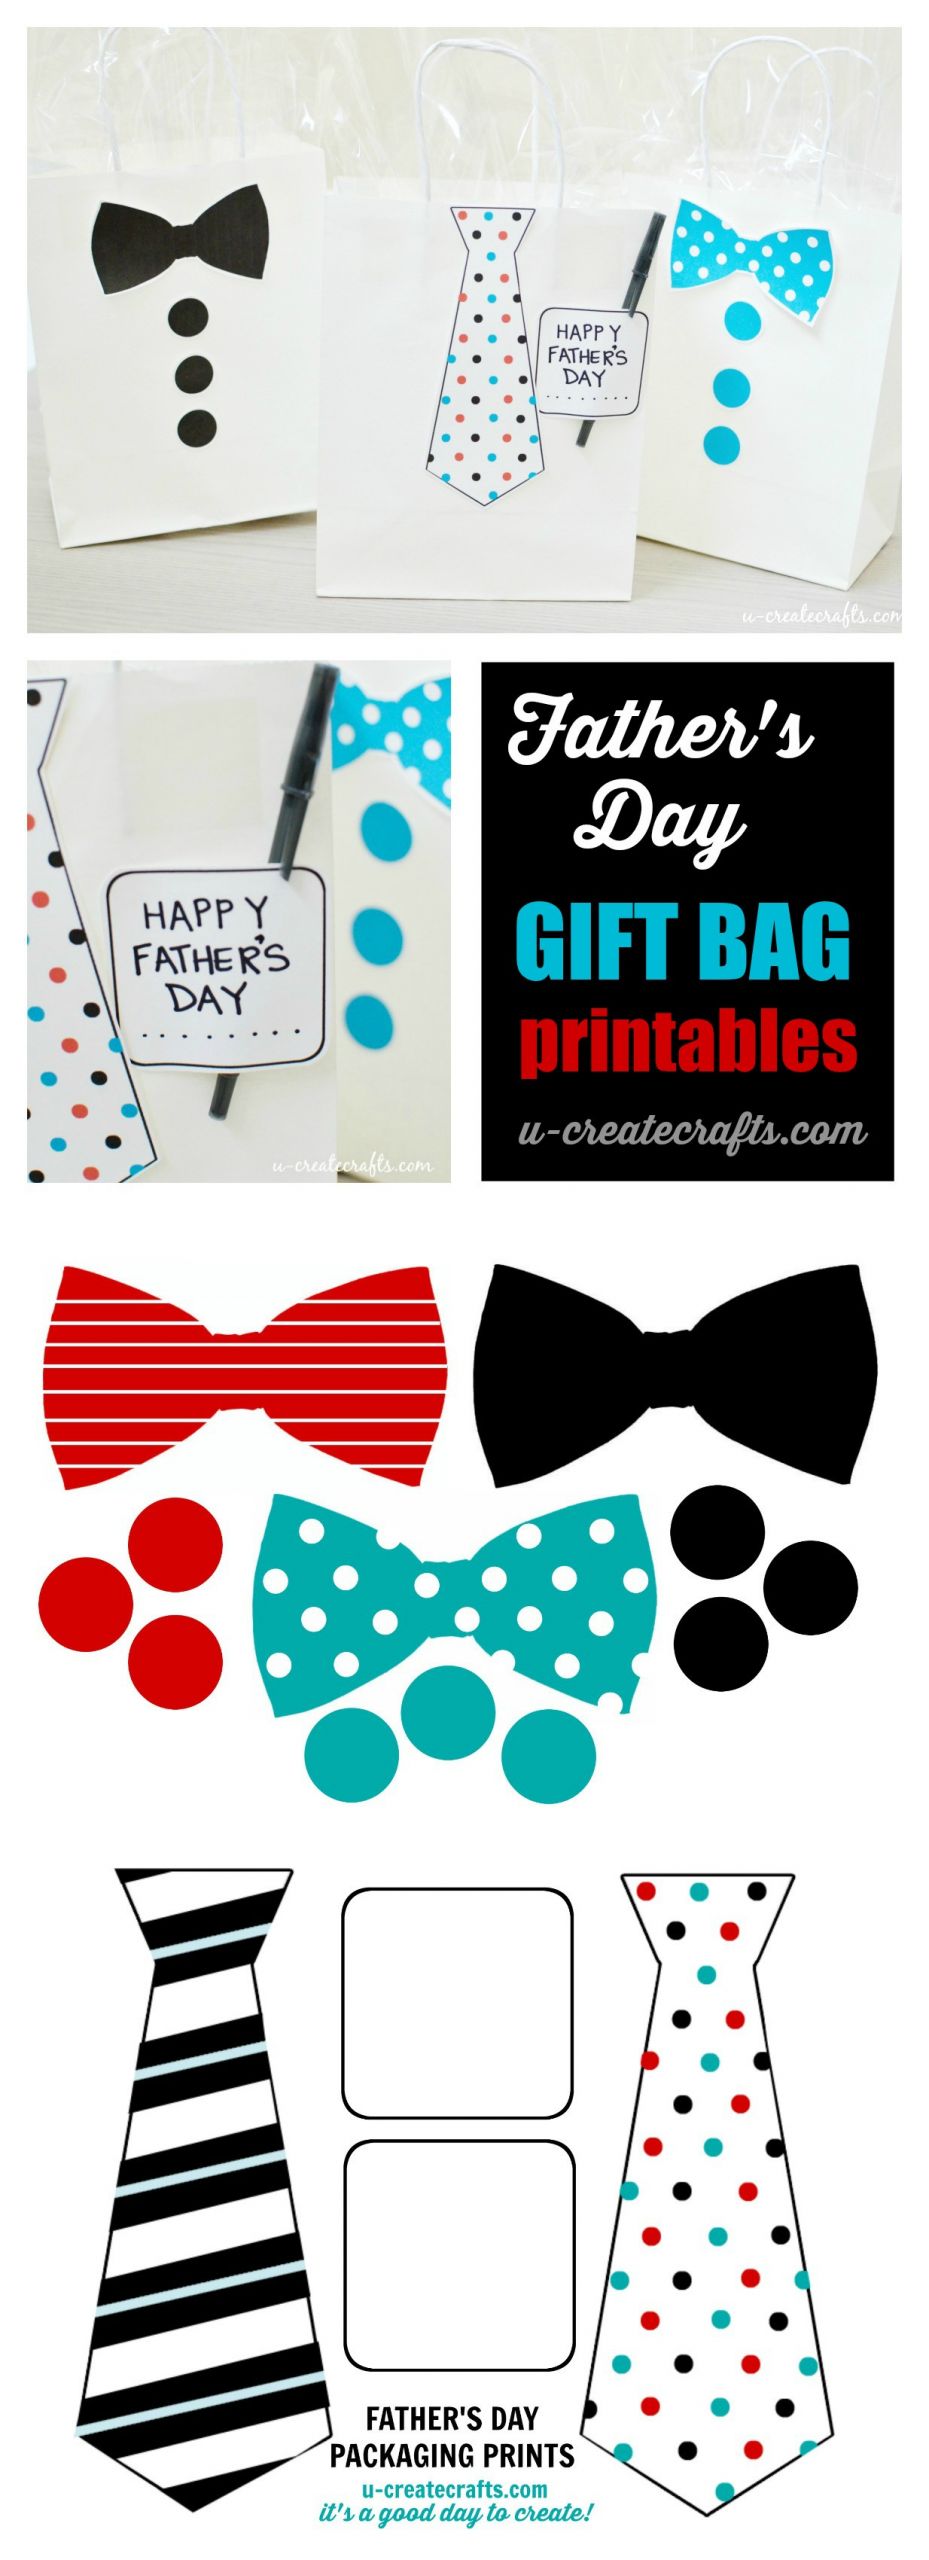 Father'S Day Gift Ideas From Baby
 Father s Day Gift Bag Printables U Create